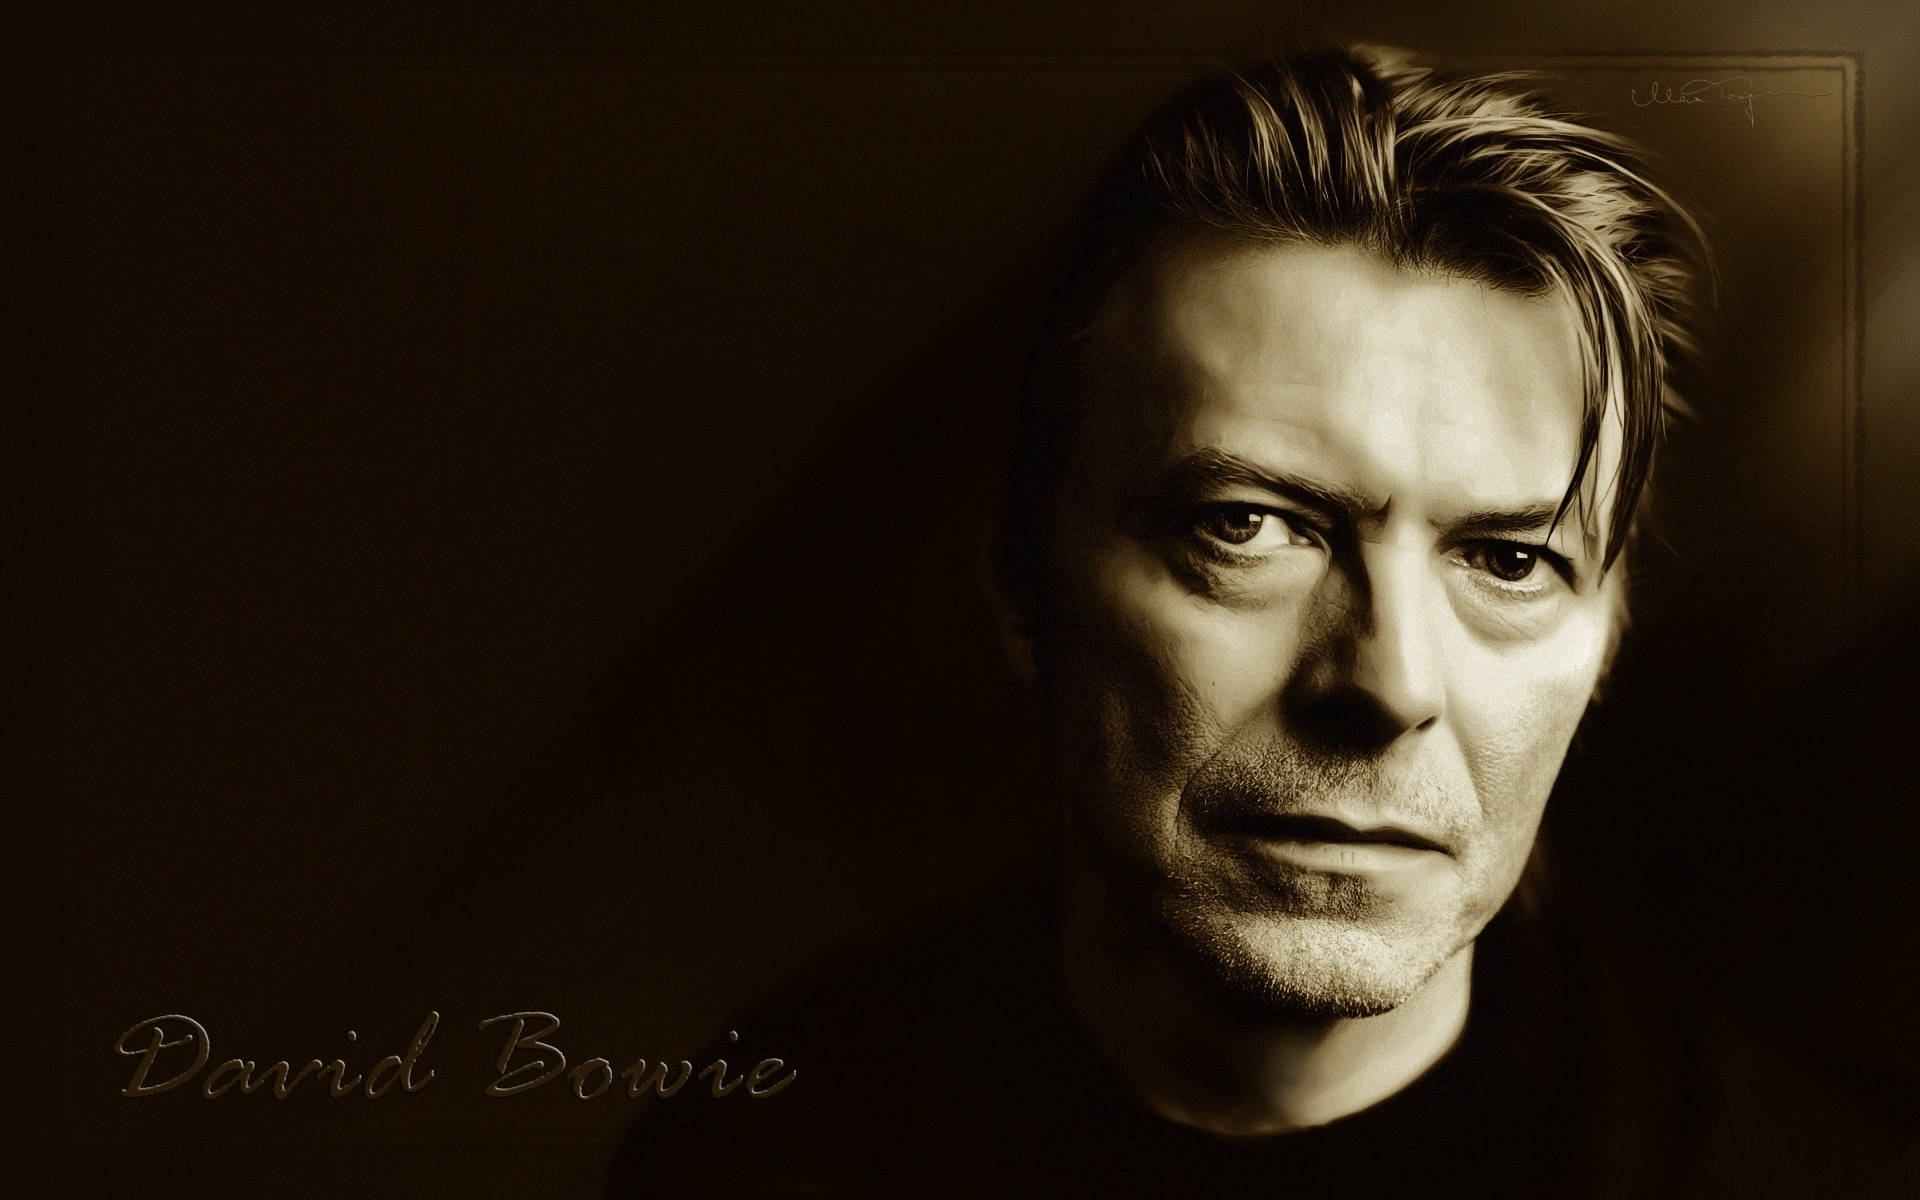 Top 999+ David Bowie Wallpaper Full HD, 4K✅Free to Use